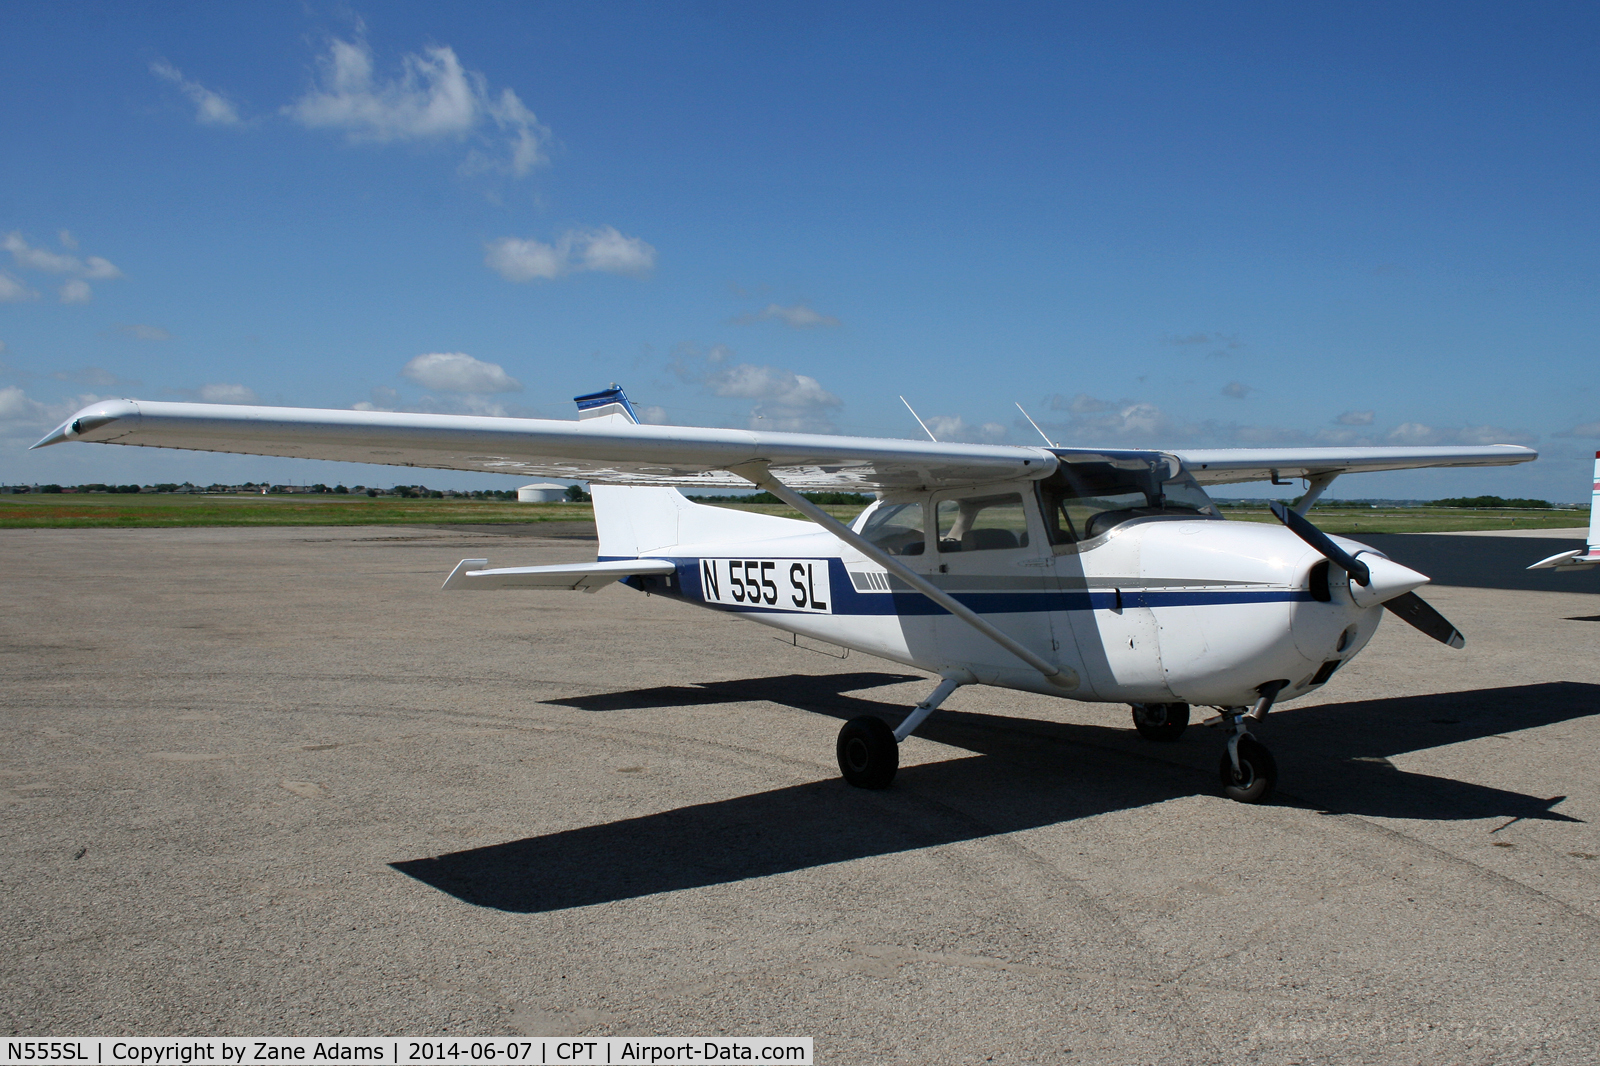 N555SL, 1973 Cessna 172M C/N 17262755, At Cleburne Municipal Airport - EAA Young Eagles Rally